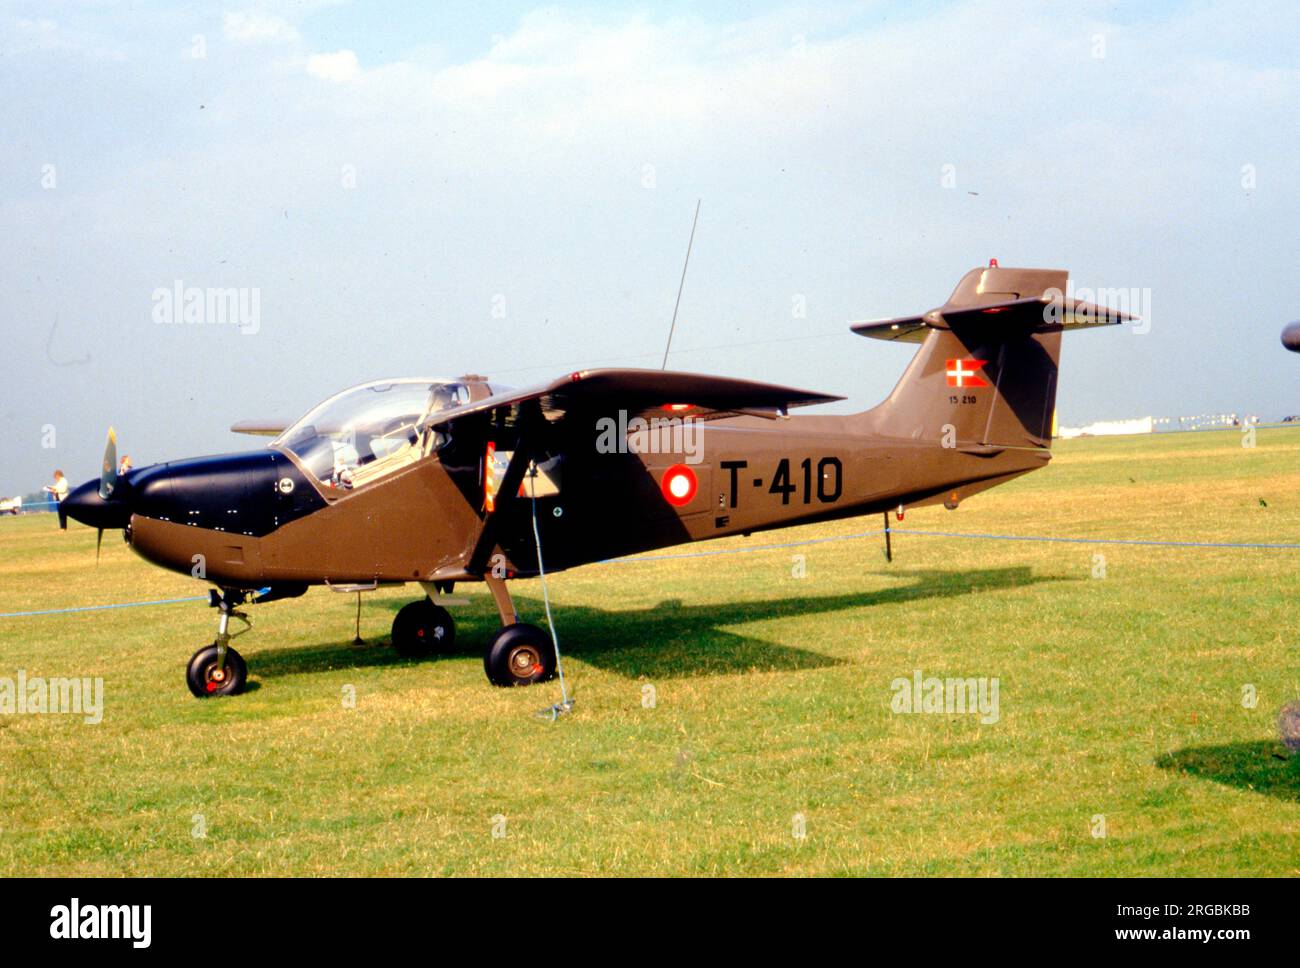 Flyvevabnet - Saab MFi-17 Supporter T-410 (msn 15-210), at Middle Wallop on 13 July 1986. (Flyvevabnet - Royal Danish Air Force). Stock Photo